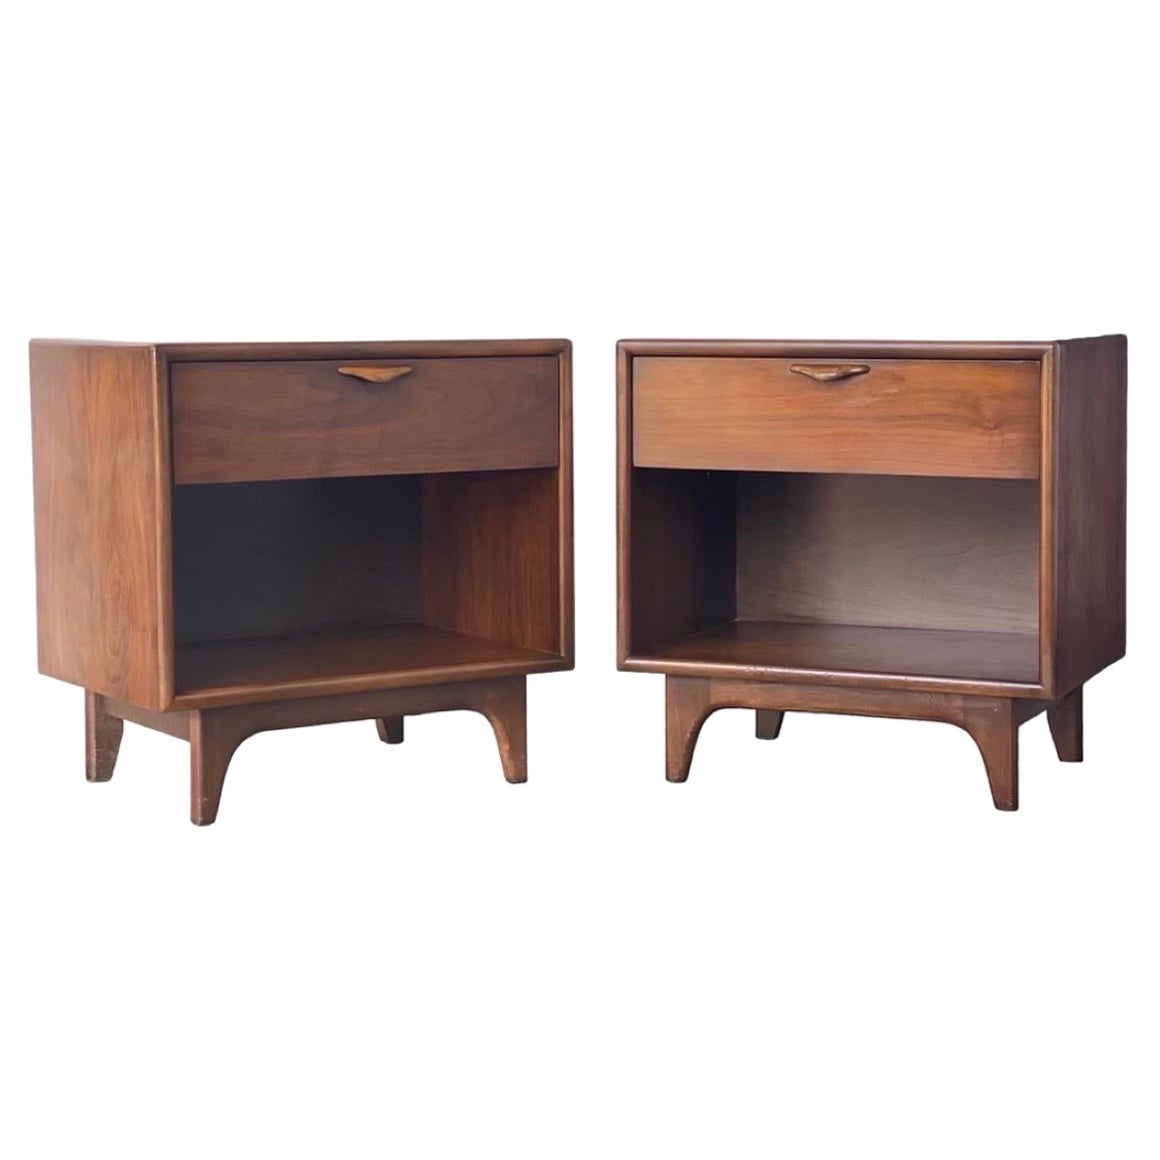 Vintage Mid-Century Modern Walnut End Table Set. Dovetail Drawers by Lane For Sale